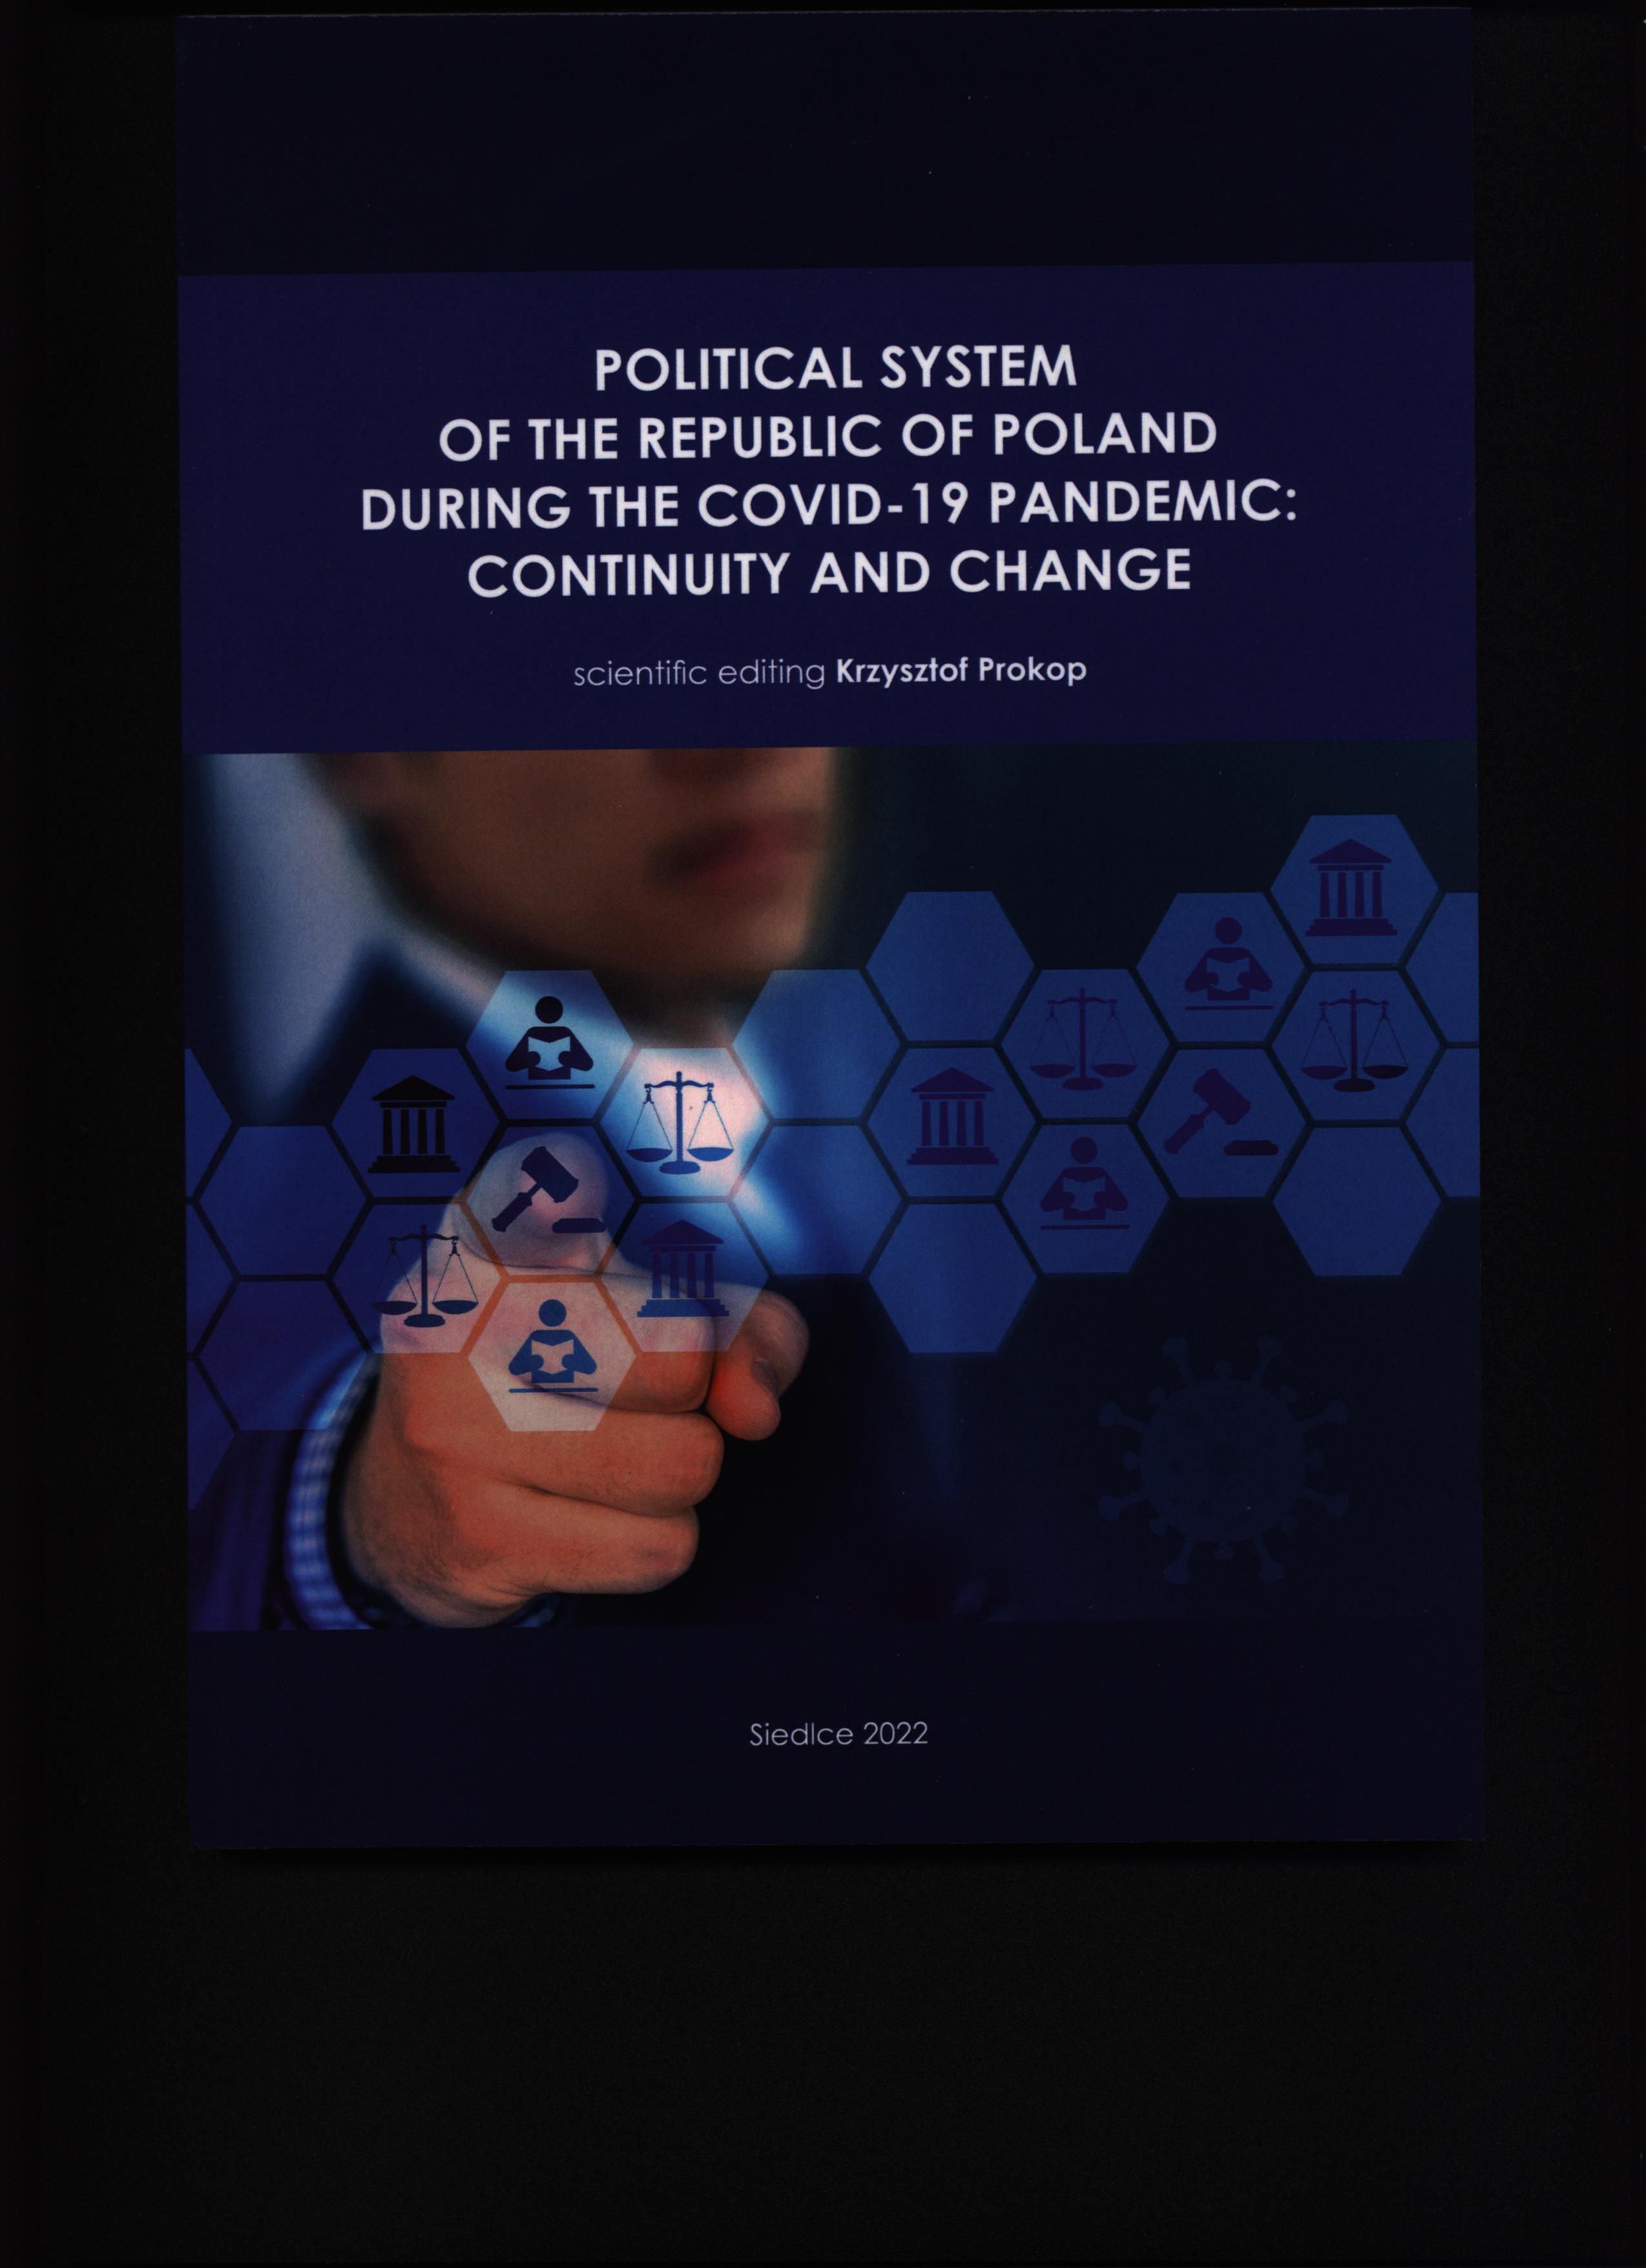 Okładka książki - Political system of the Republic of Poland during the COVID-19 pandemic: continuity and change